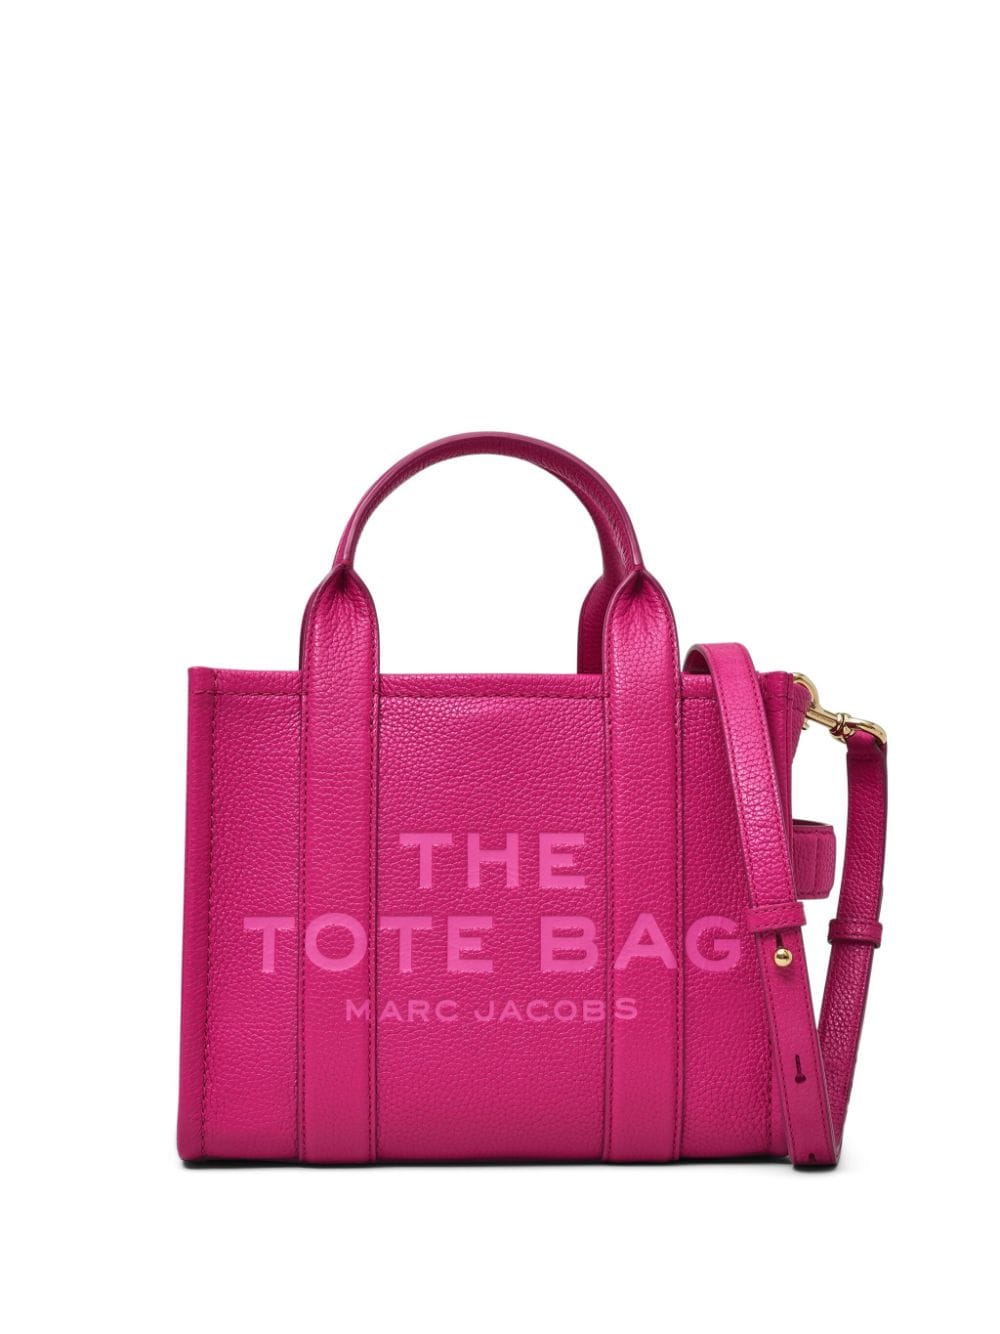 Marc Jacobs The Leather Small Tote bag - Pink von Marc Jacobs